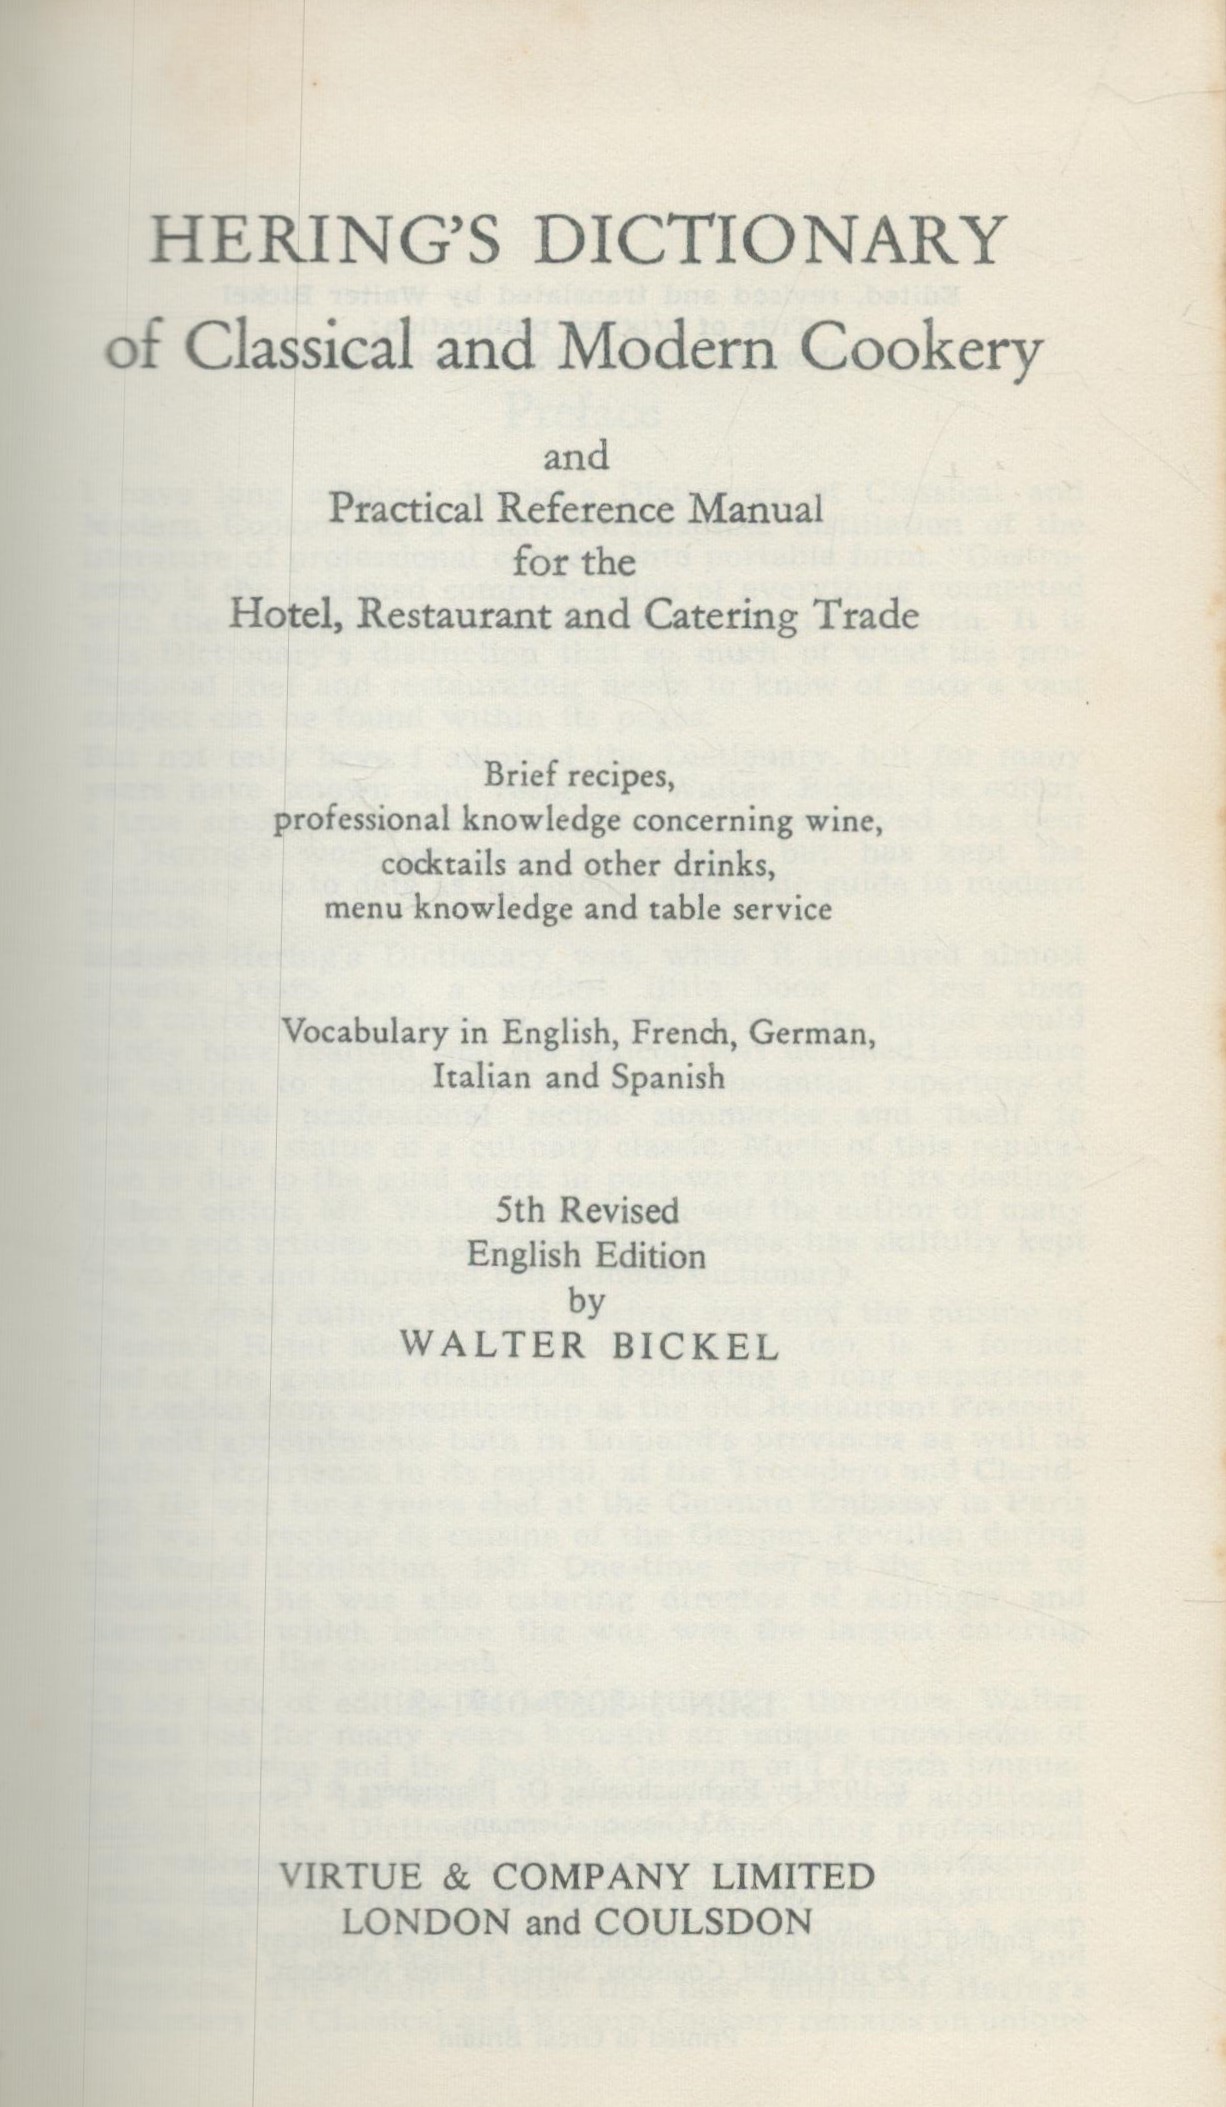 Hering's Dictionary of Classical and Modern Cookery by Walter Bickel 1977 hardback book with 852 - Image 2 of 3